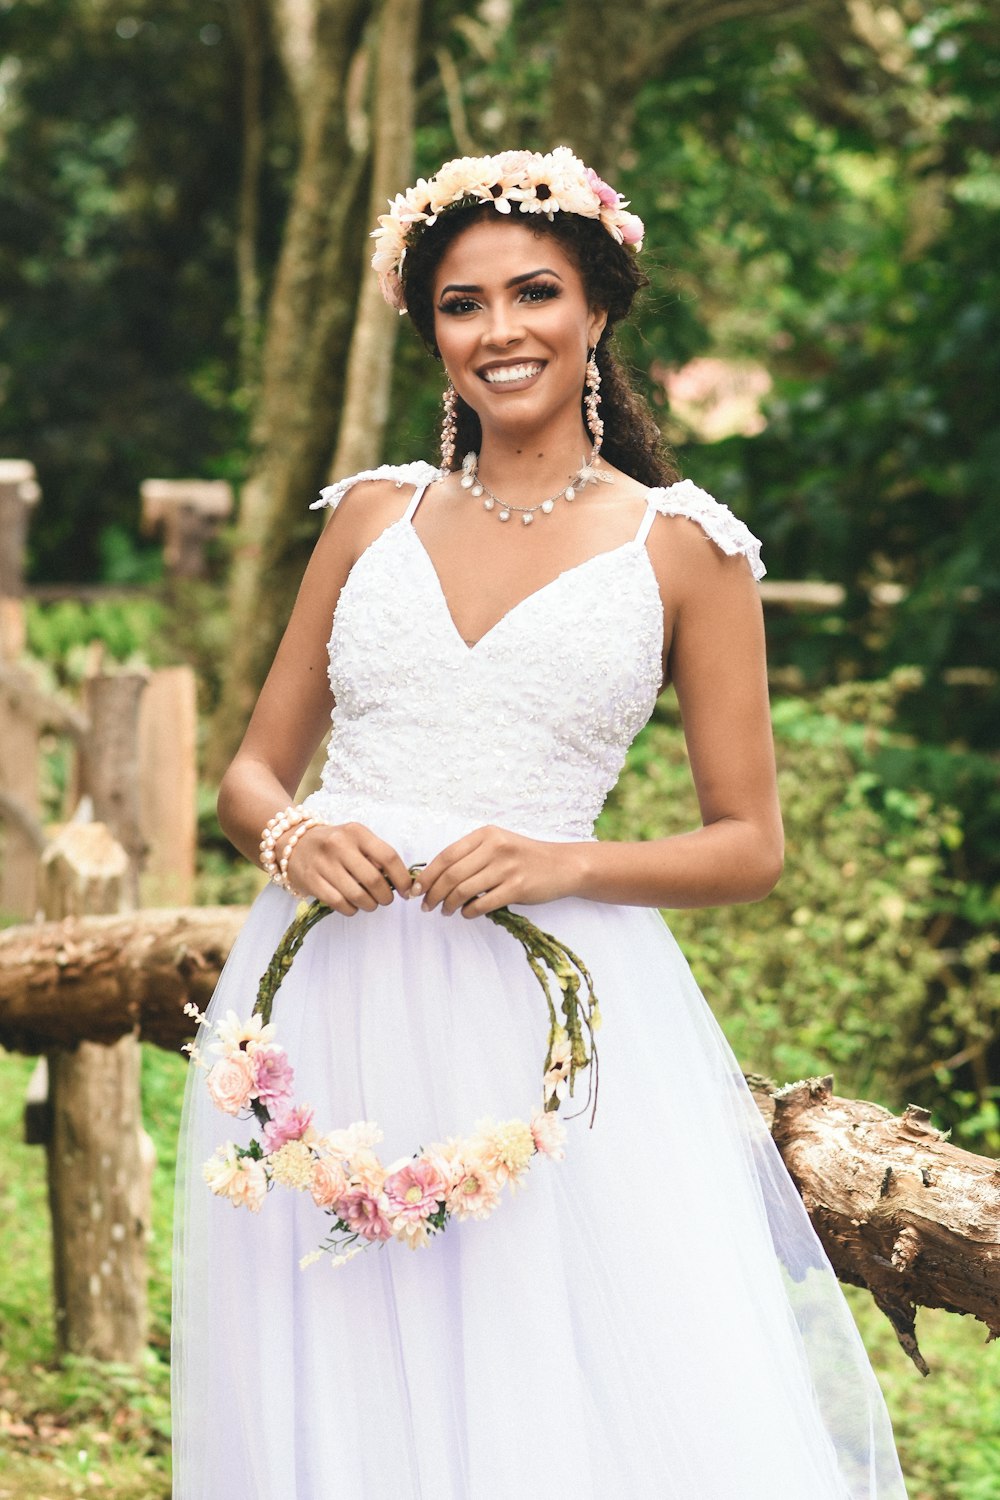 woman in white floral wedding dress standing near brown wooden fence during daytime